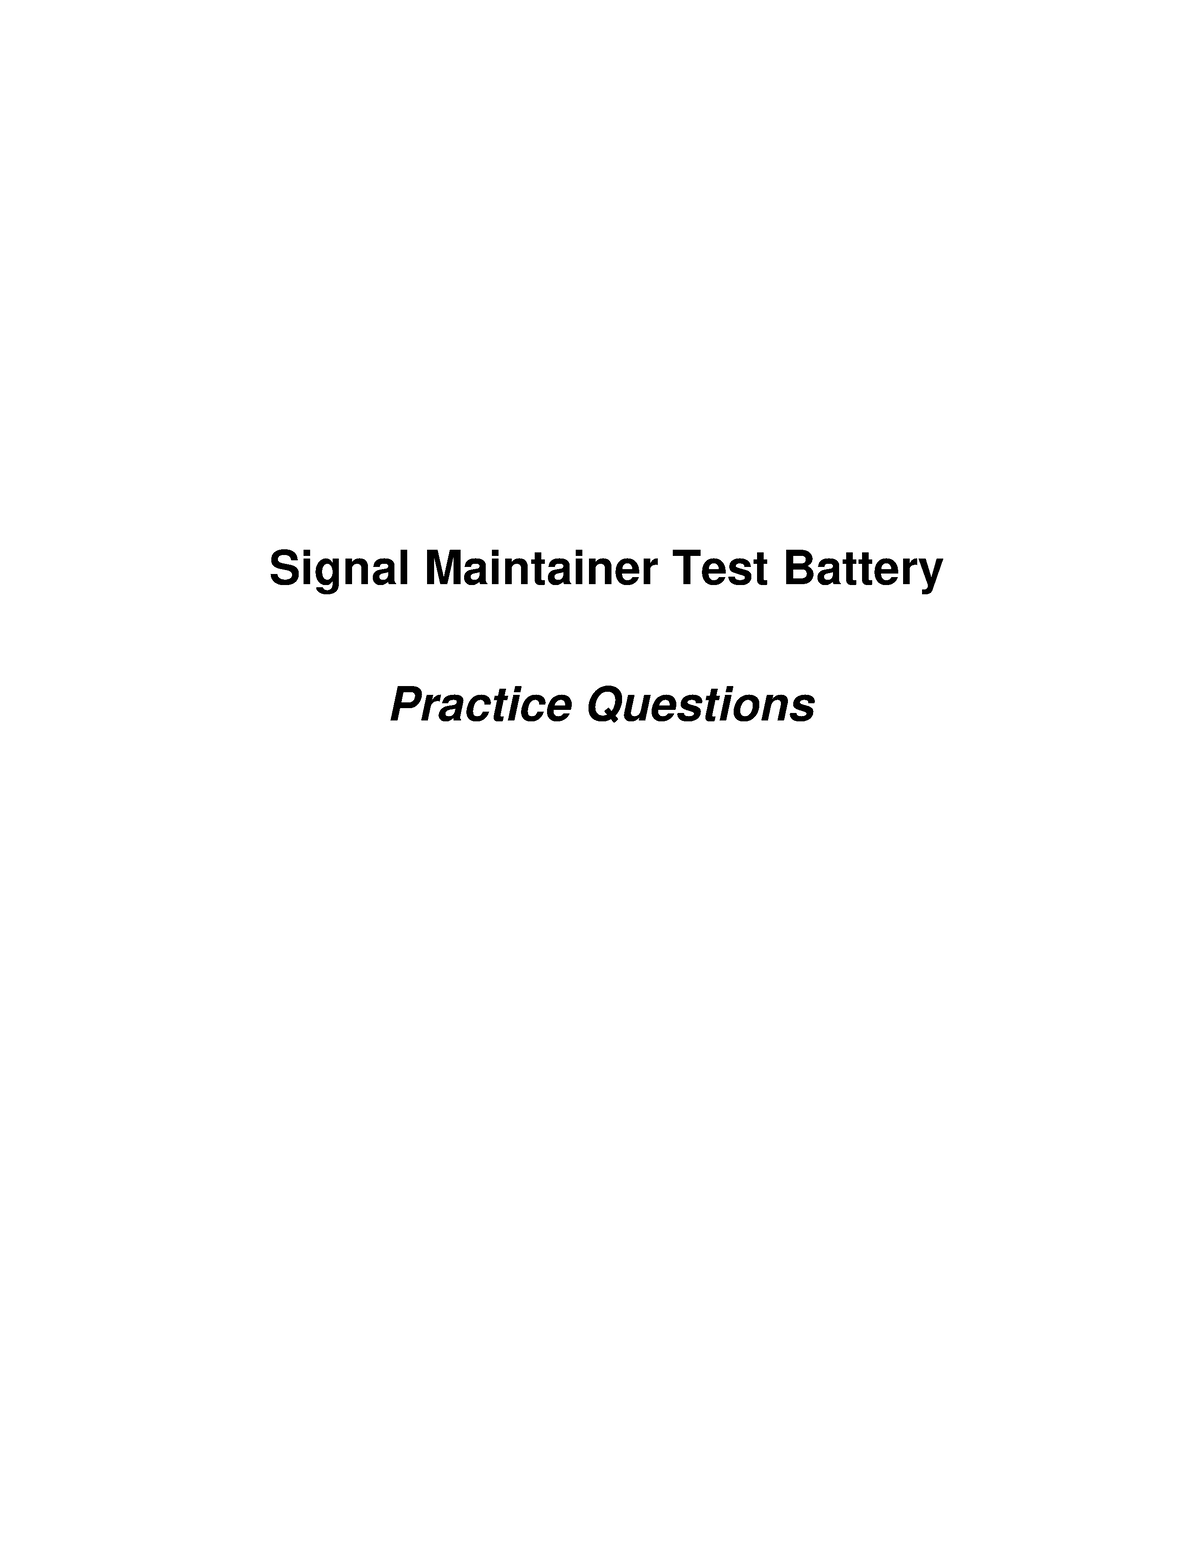 signal-maintainer-intro-to-engineering-signal-maintainer-test-battery-practice-questions